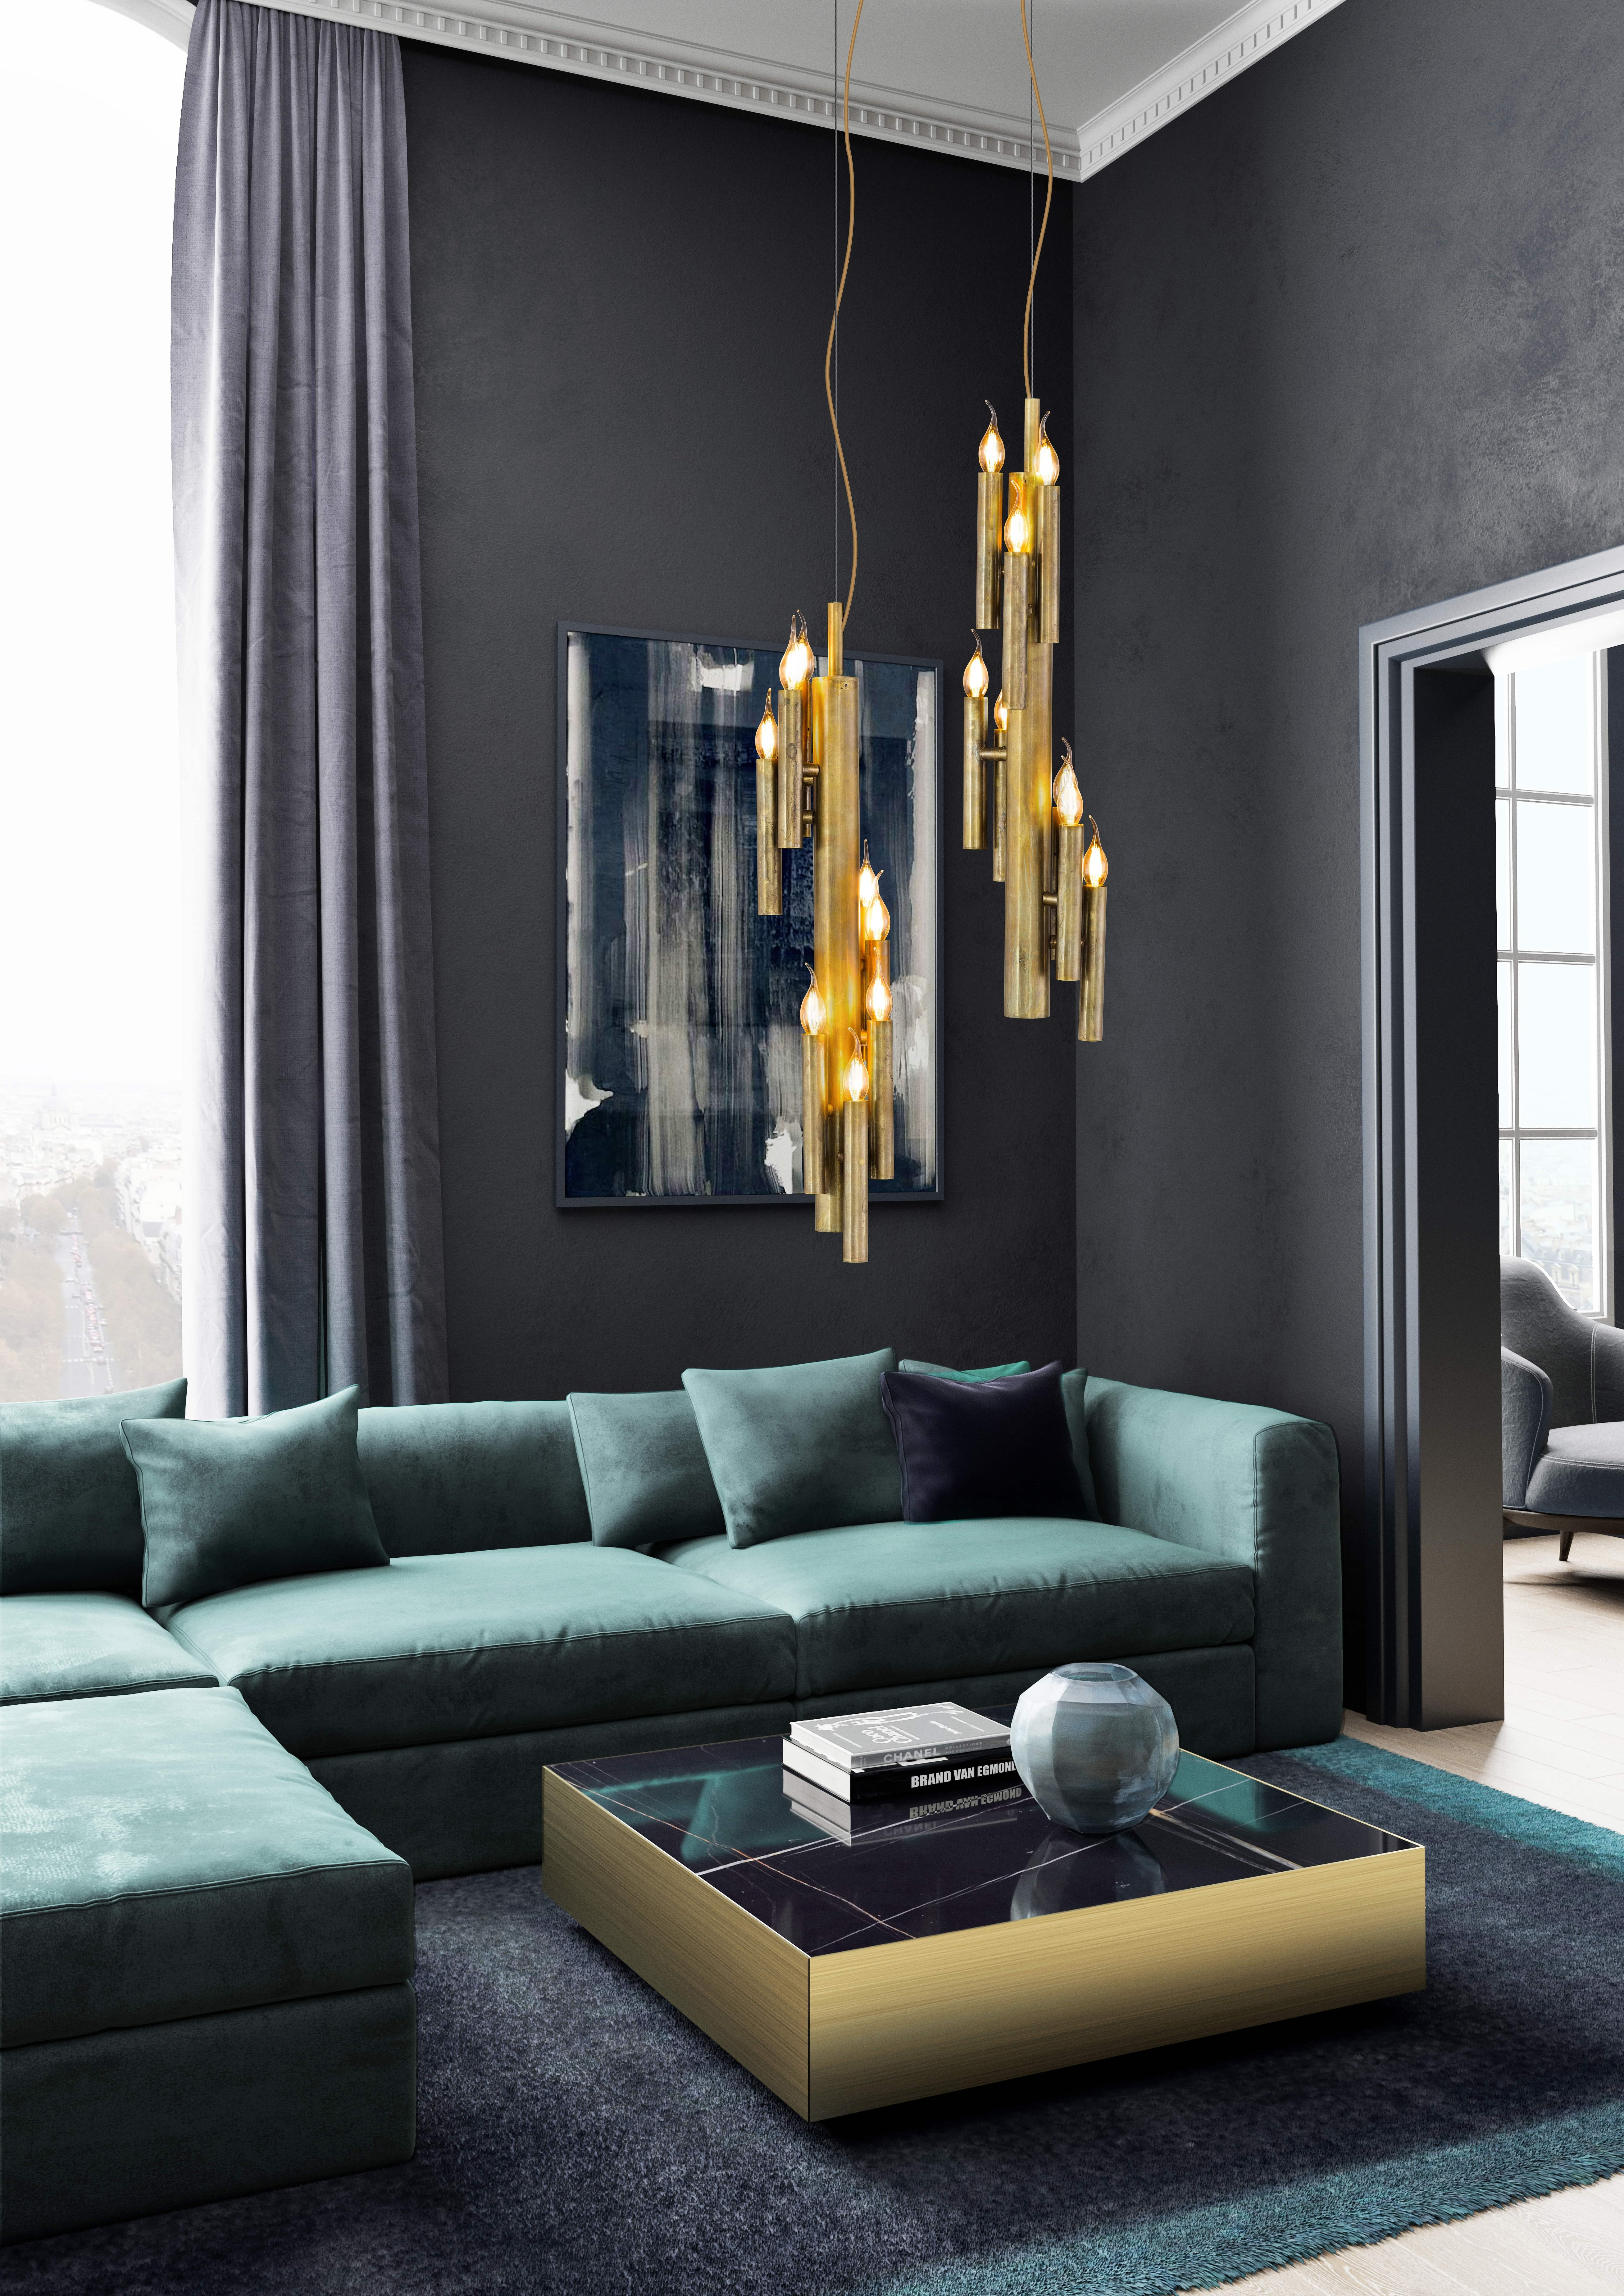 This modern pendant in a vertical shape and brass burnished finish is part of the Shiro collection. Created by hand, the pendant is available in three heights with a downlight to use as a single lighting element or to create your own